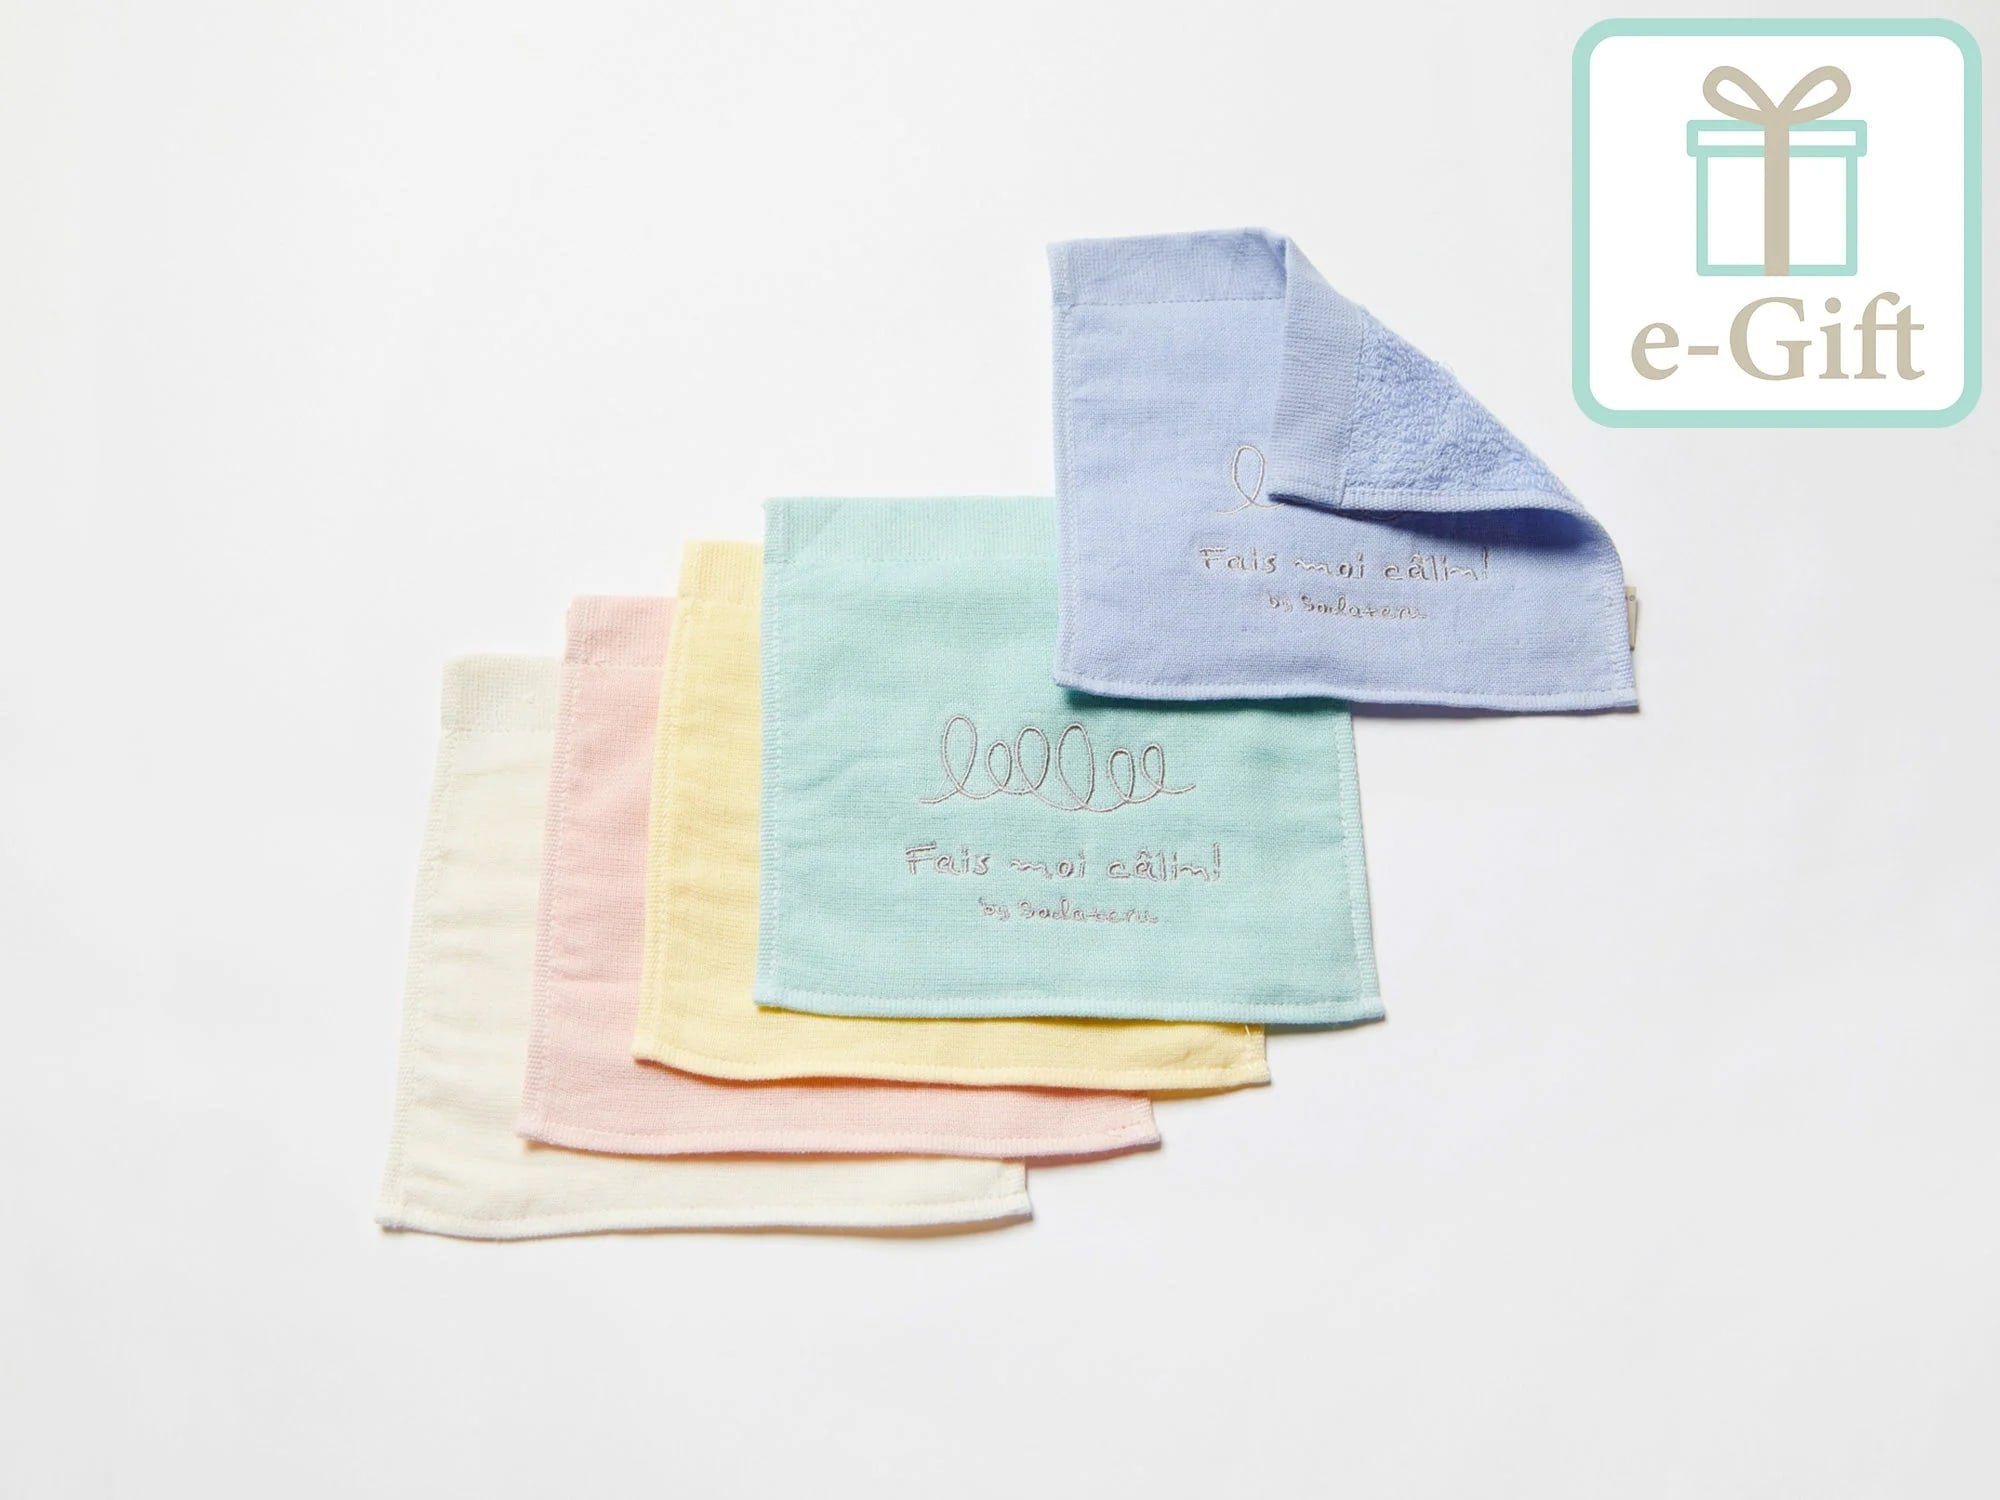 【eギフト】Fais moi calin！ My first towel (スタイハンカチ) 2枚セット